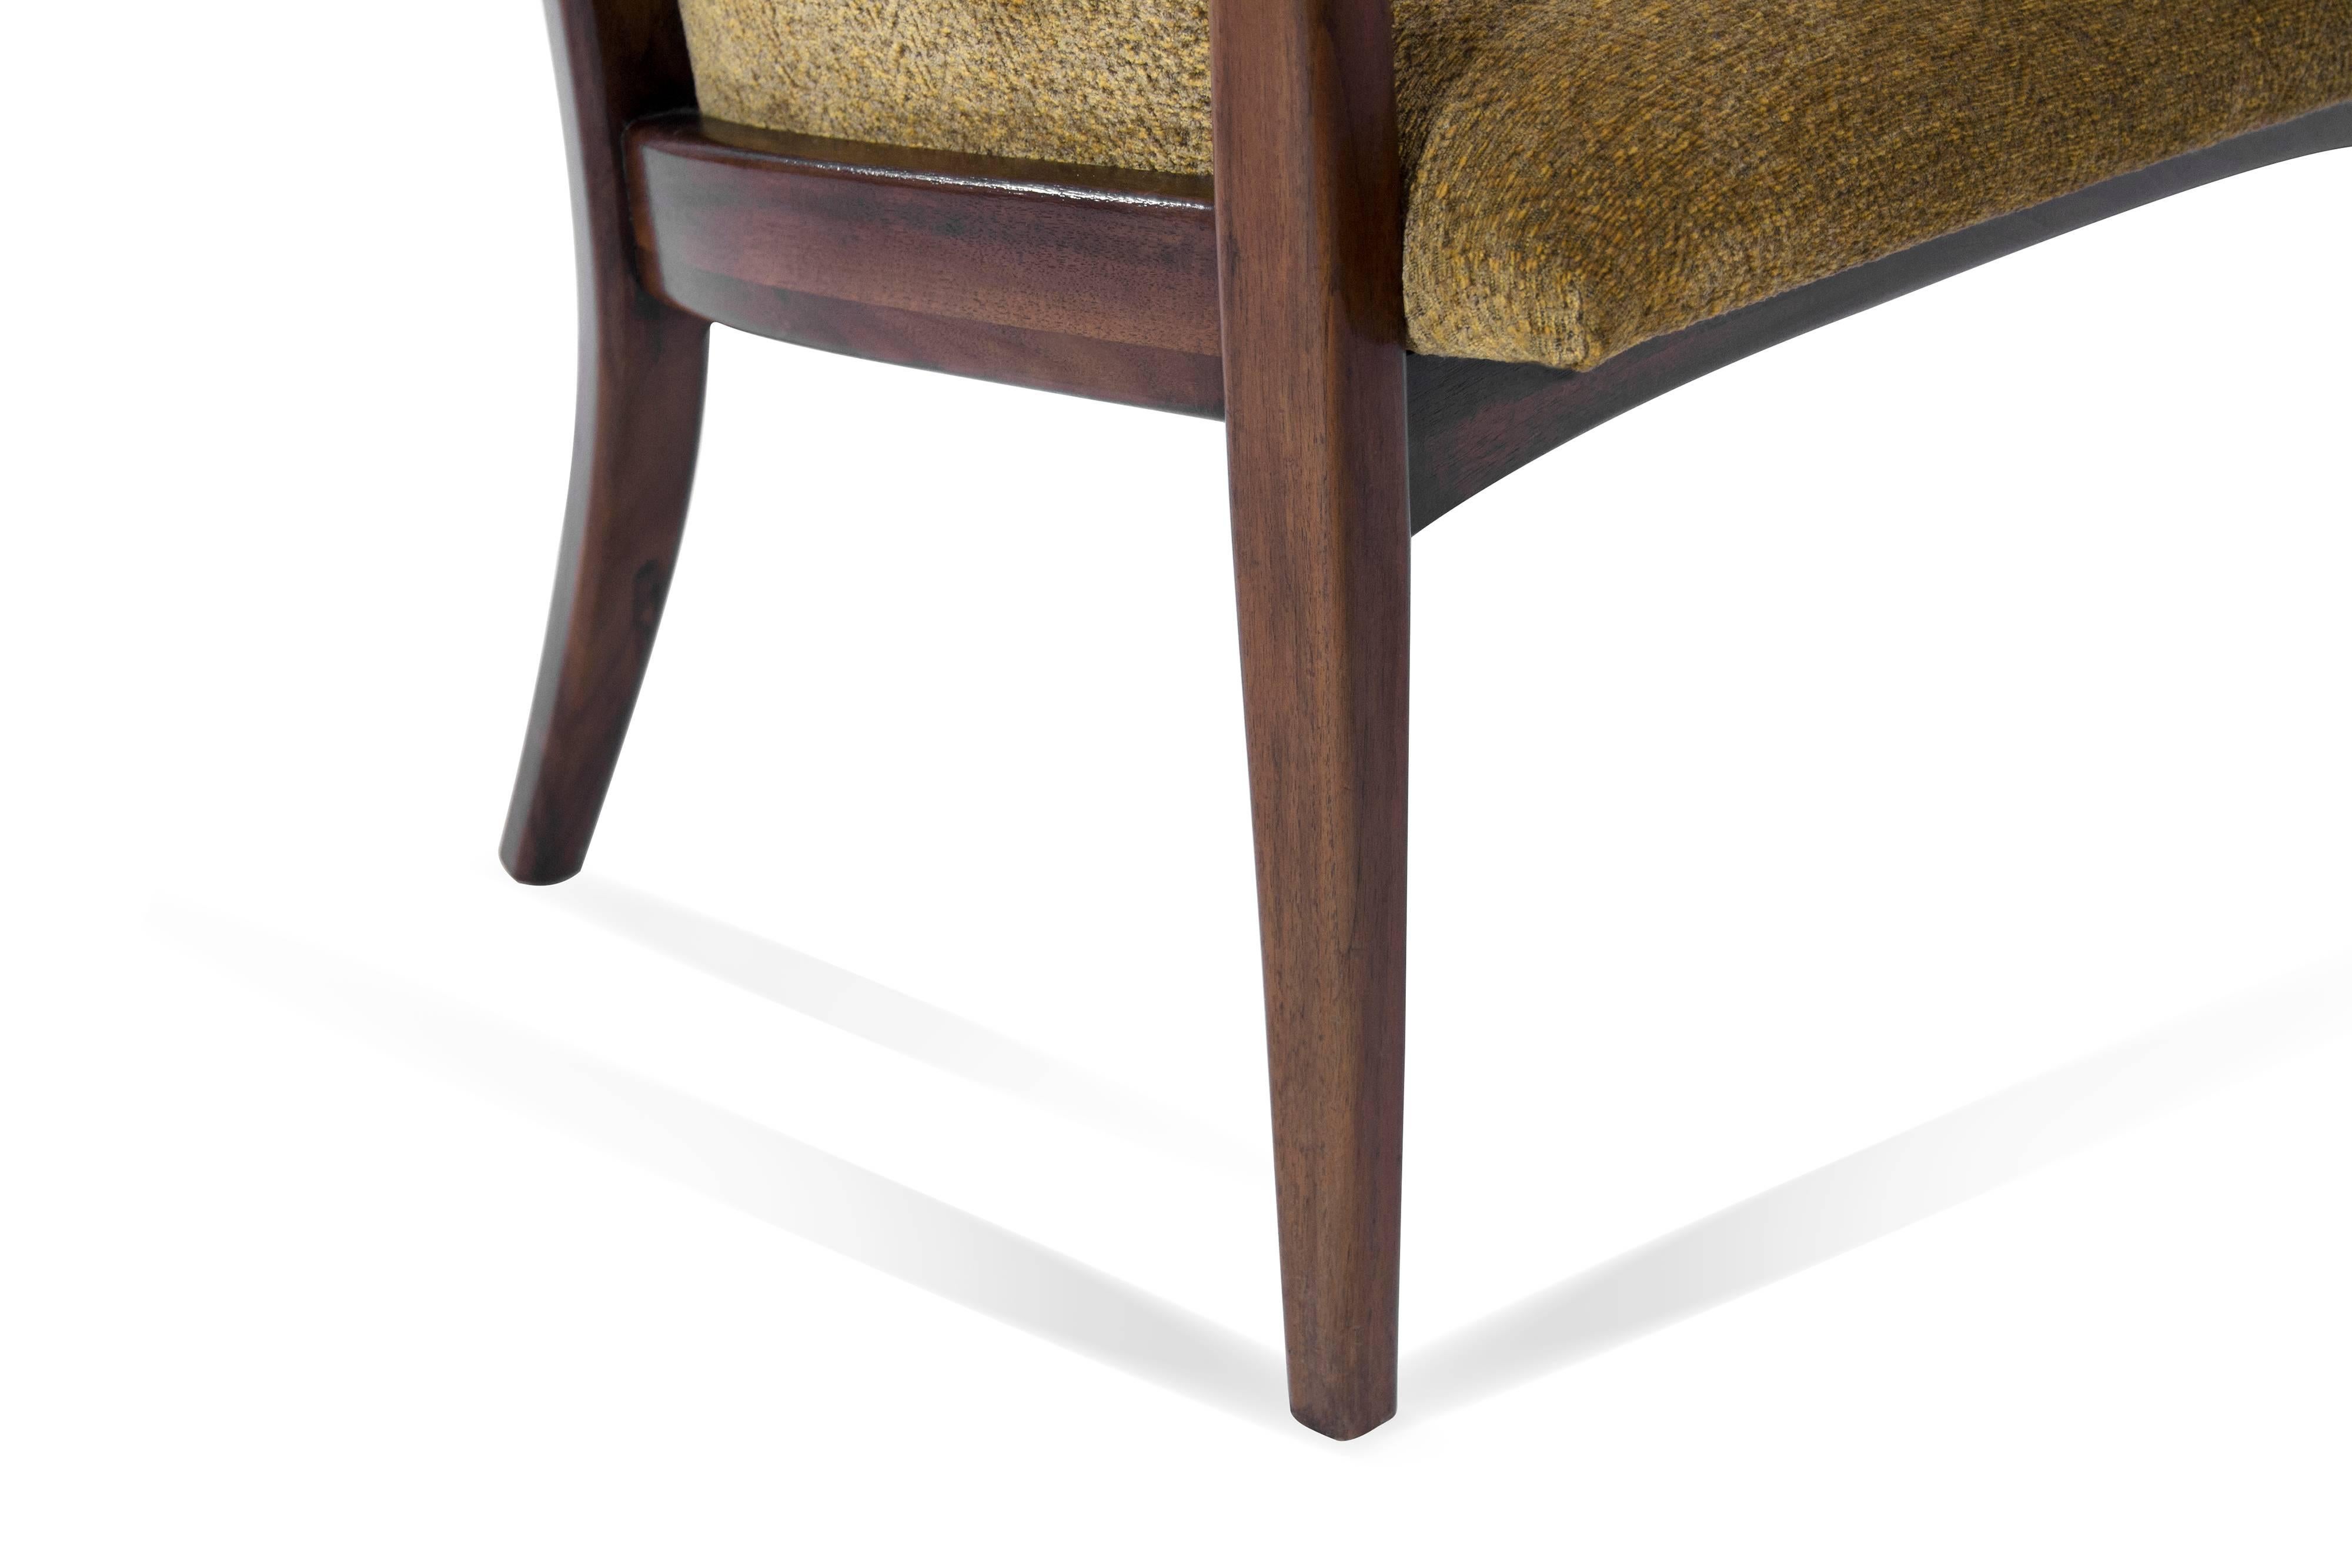 20th Century Walnut Frame Lounge Chairs by Milo Baughman for Thayer Coggin